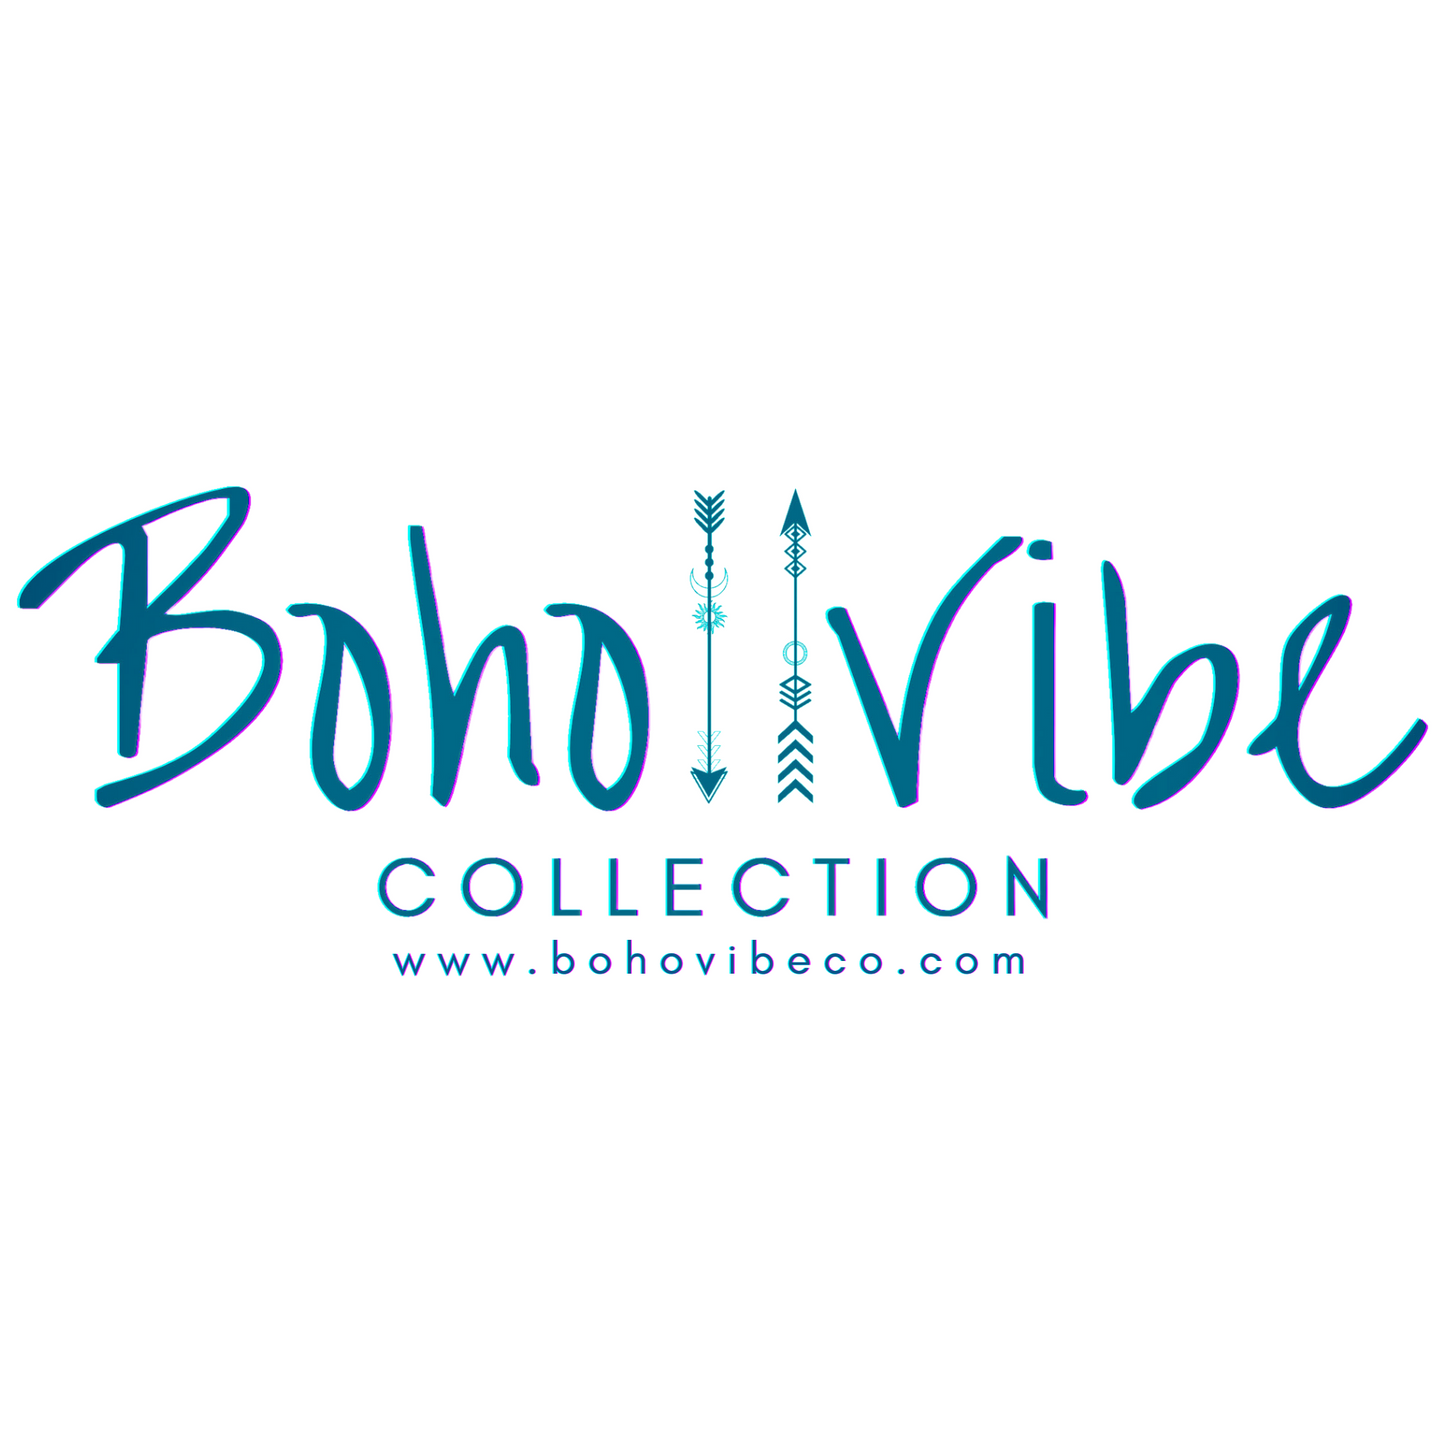 Boho ↡↟ Vibe Collection ↠ Light Is the New Black: A Guide to Answering Your Soul's Callings and Working Your Light 